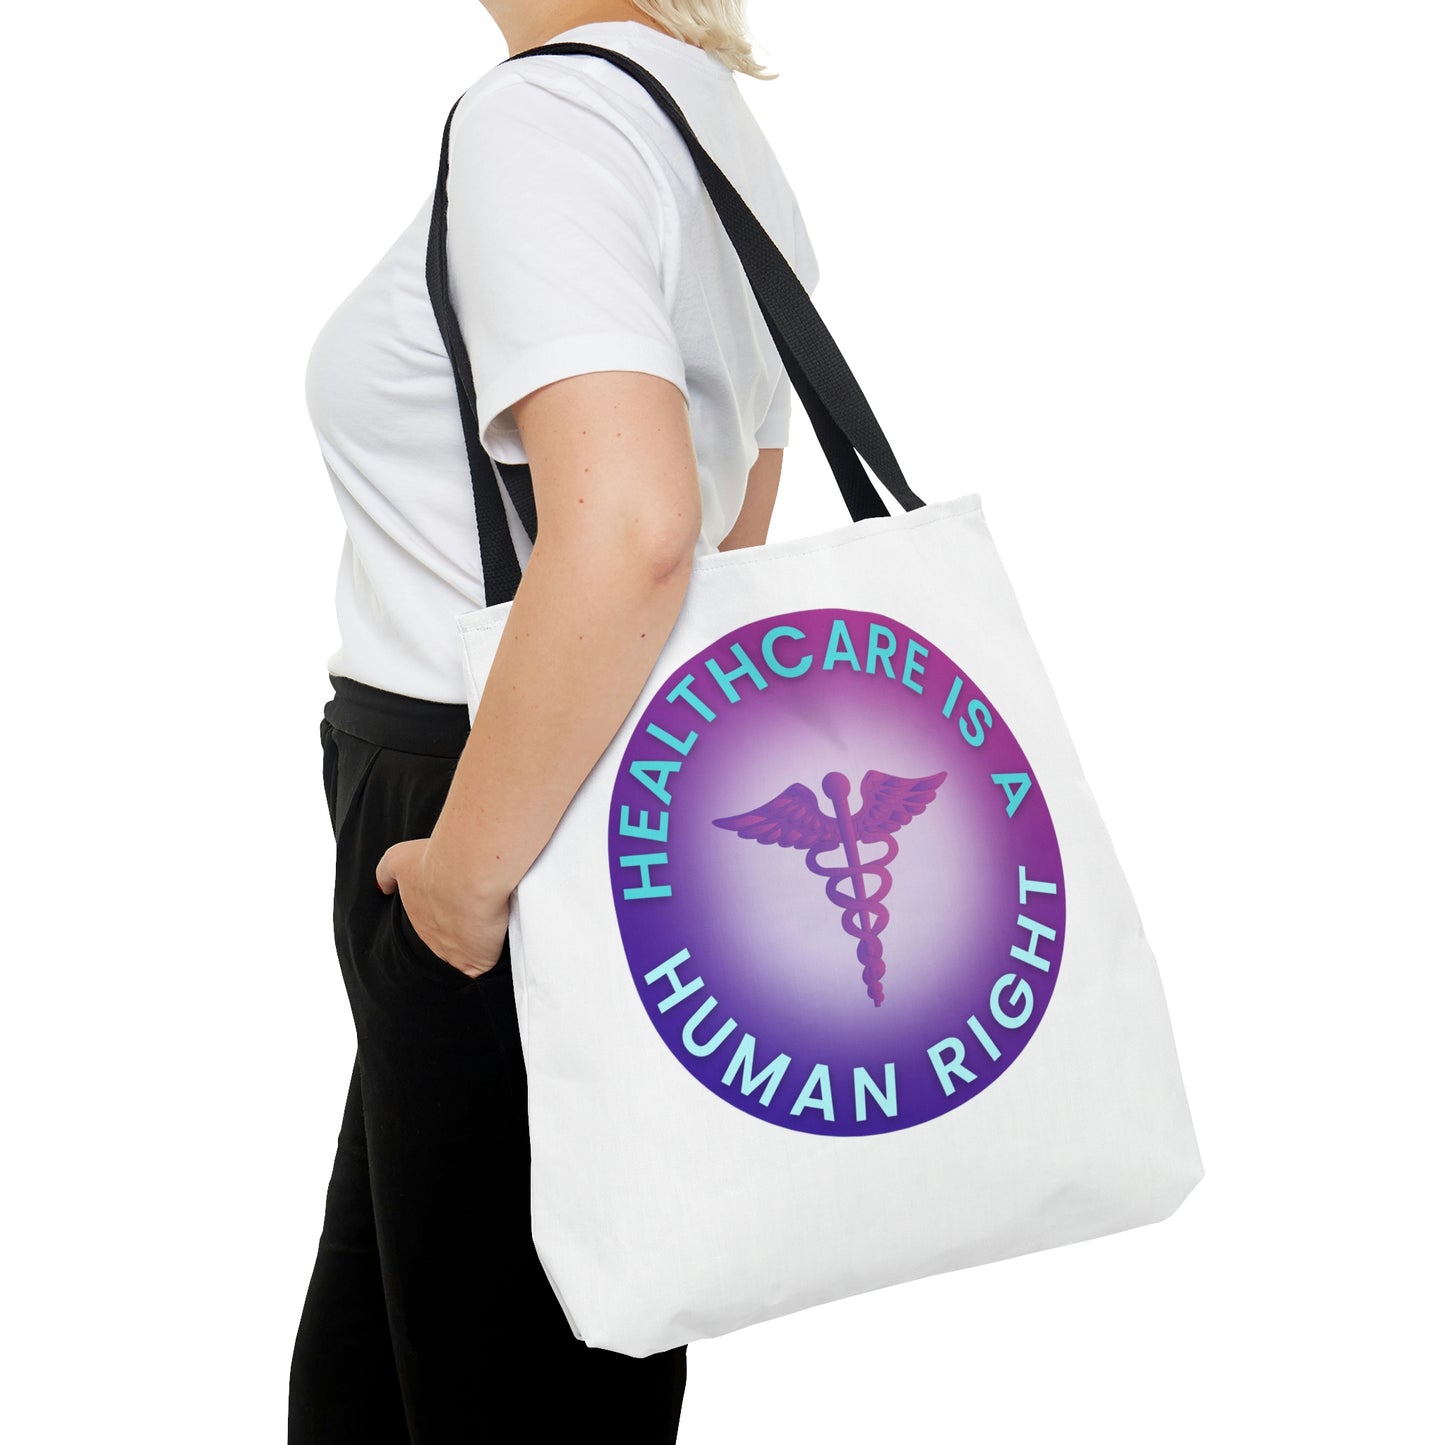 Healthcare is a Human Right AOP Tote Bag in 3 sizes